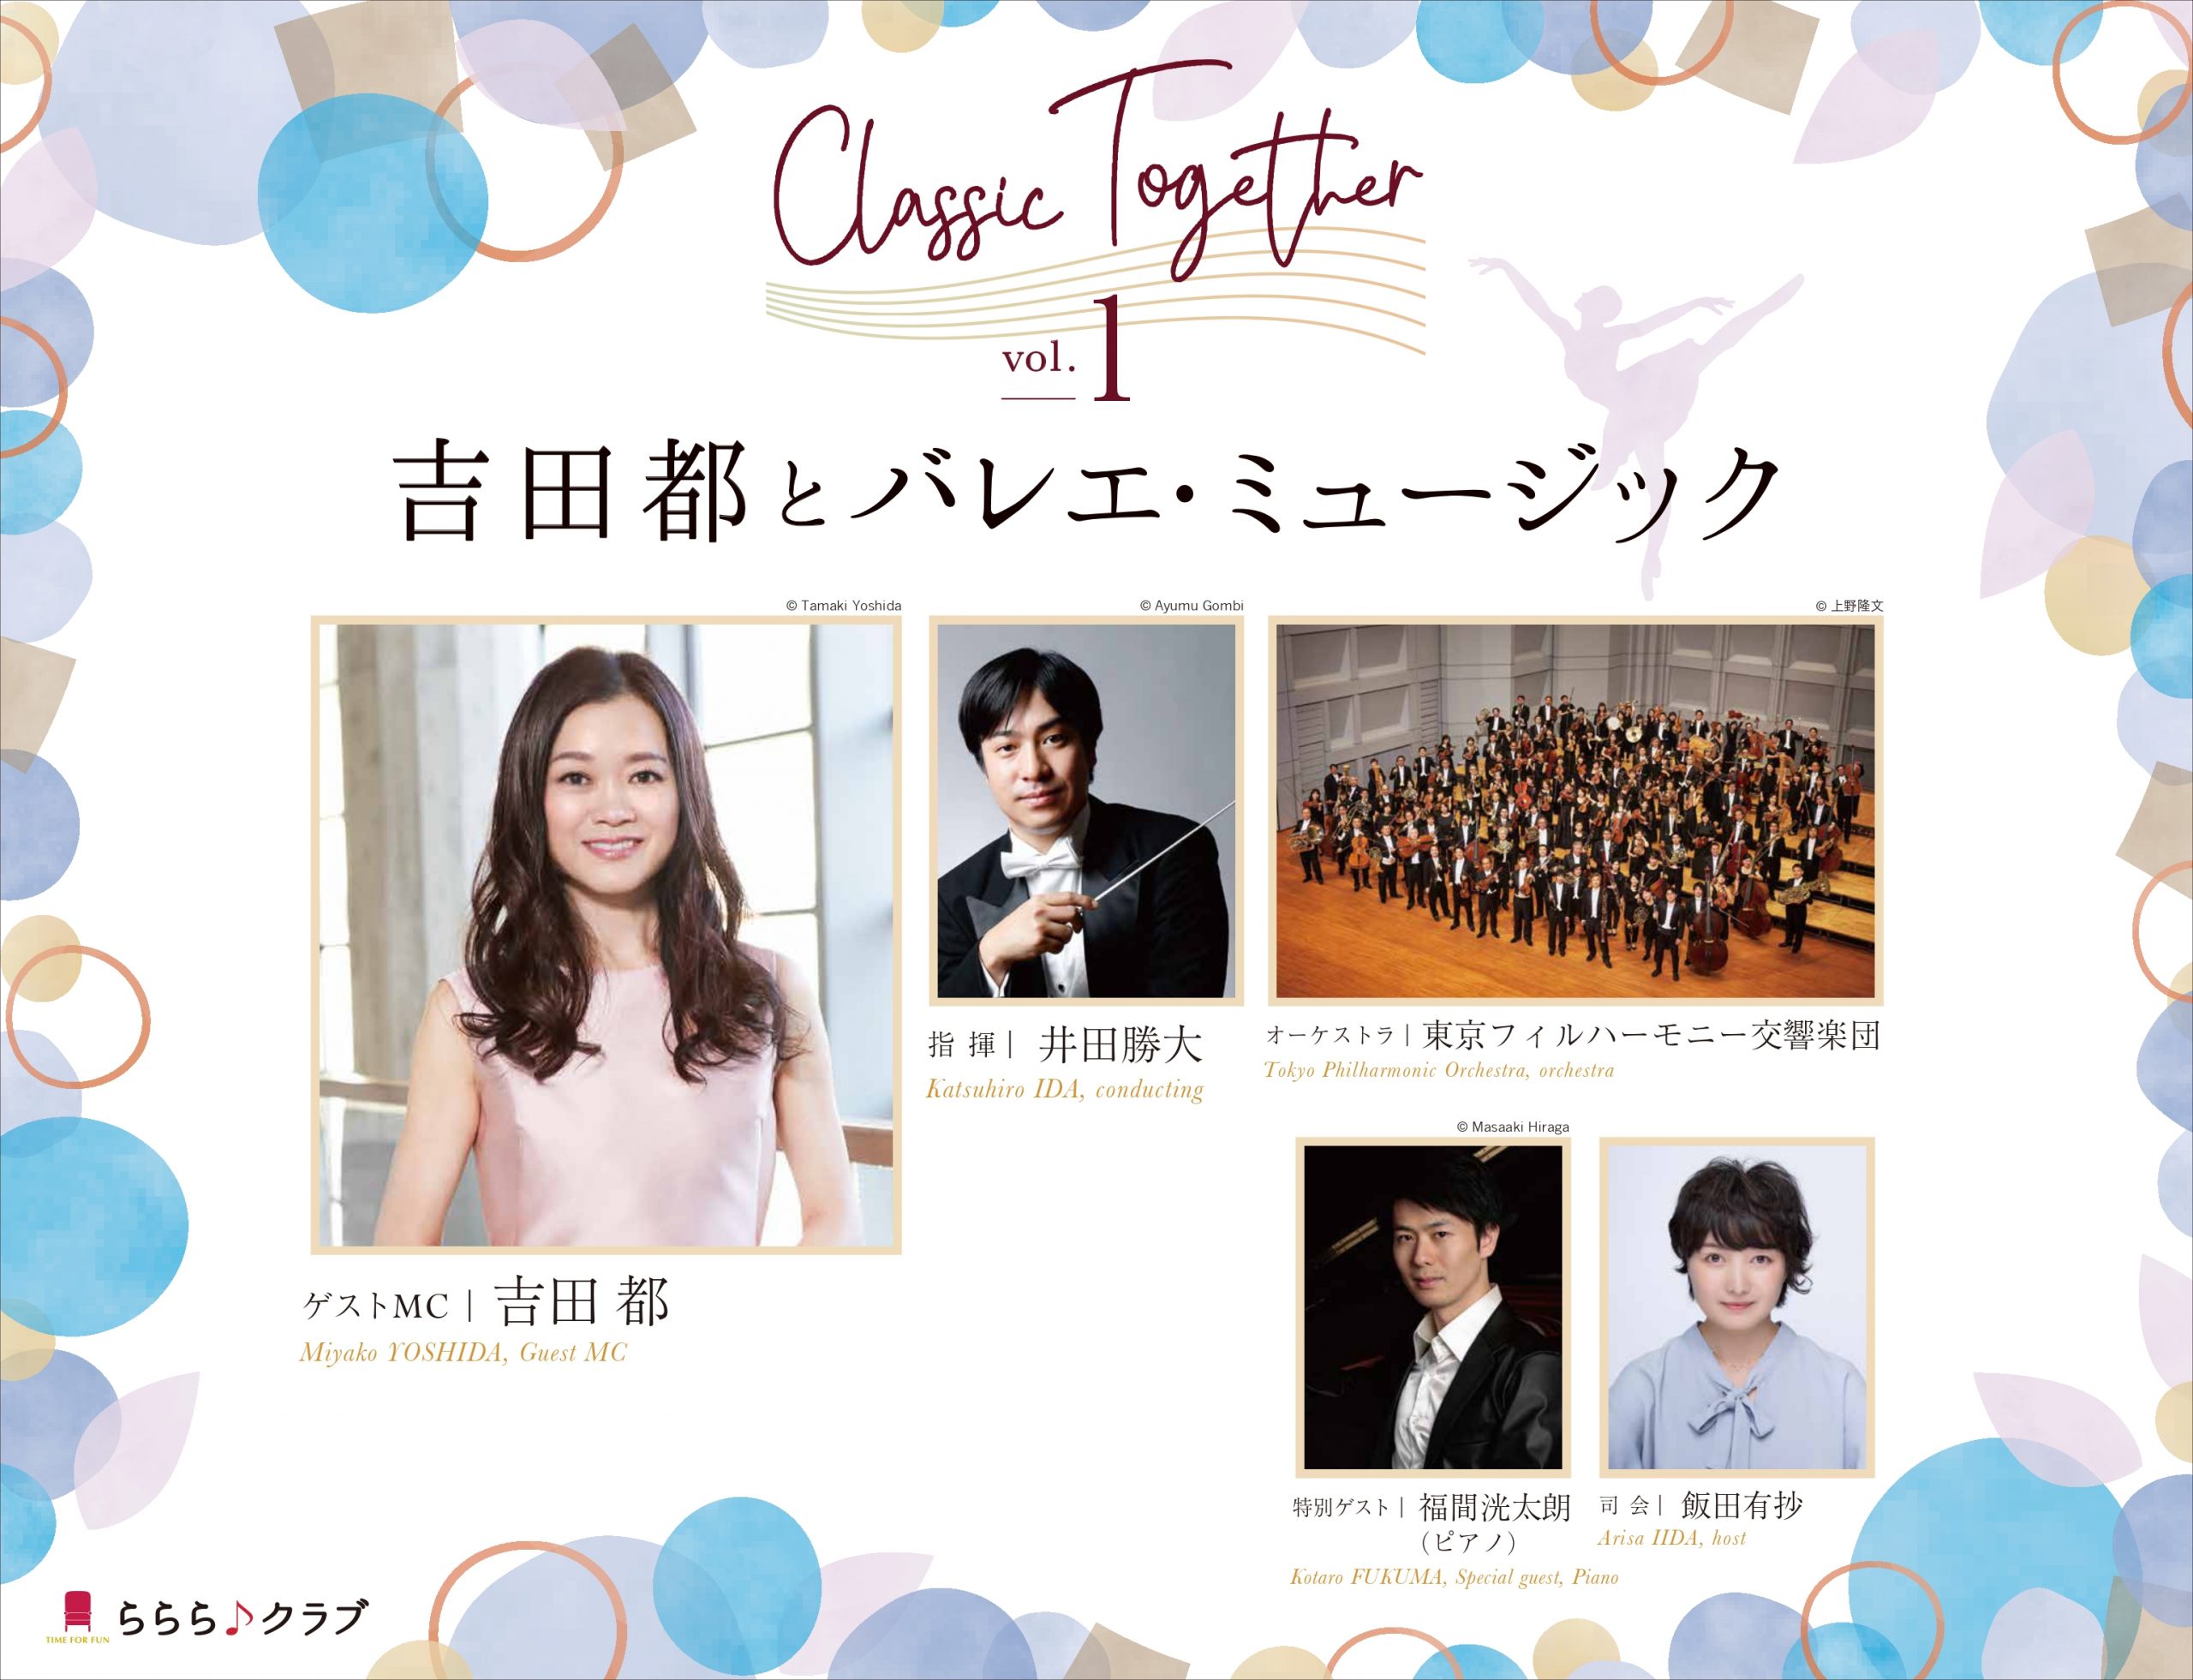 Classic Together Vol.1<br>吉田都とバレエ・ミュージック